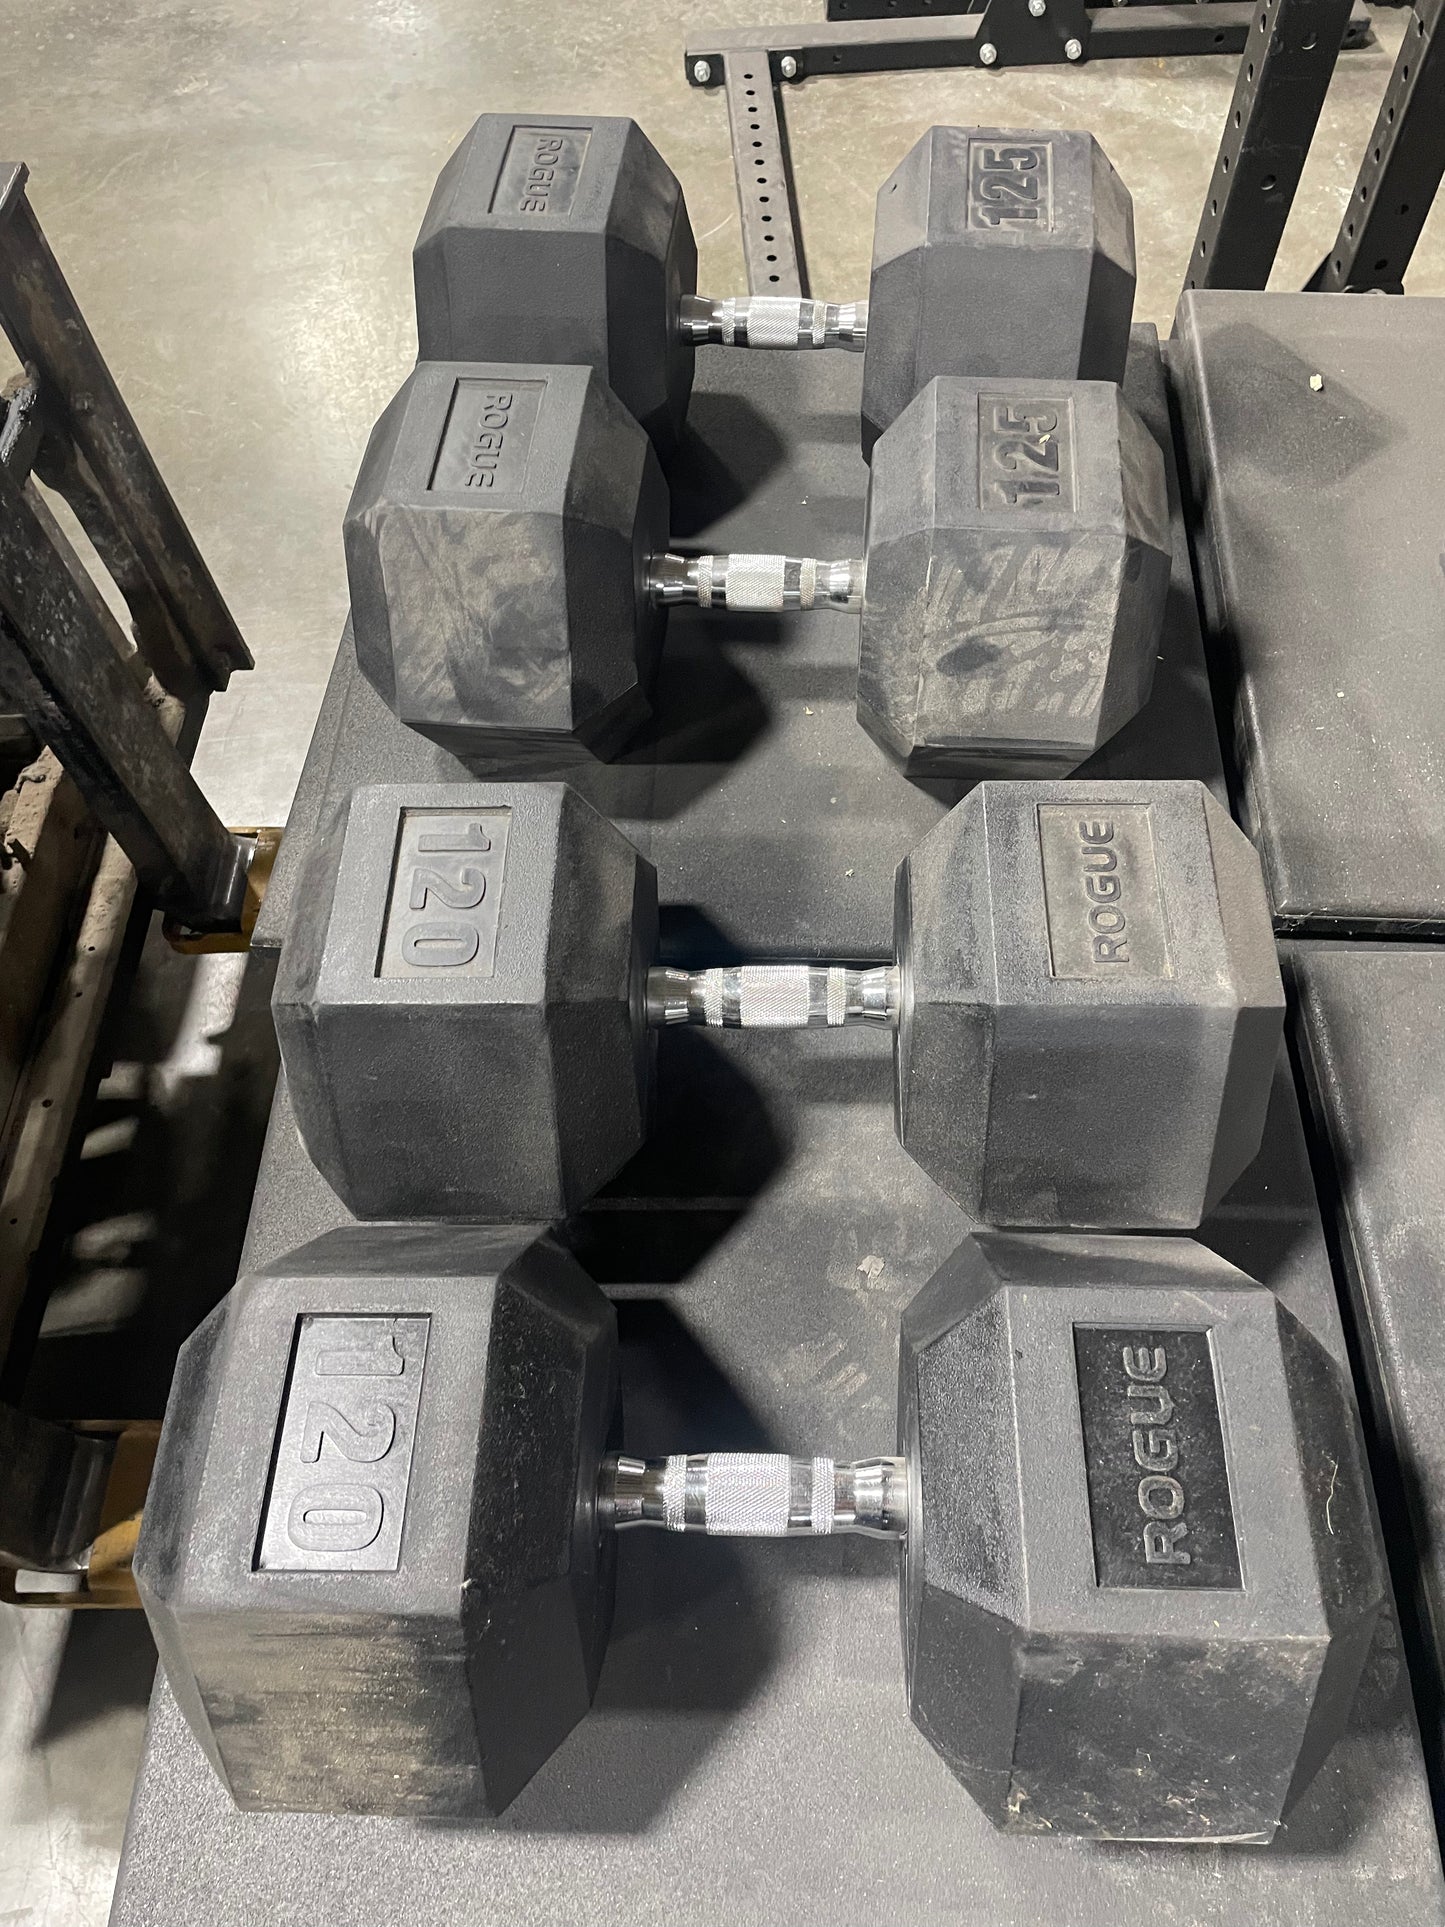 Troy with heavey ROGUE RUBBER HEX DUMBBELLS 5-125lbs w/ Rack